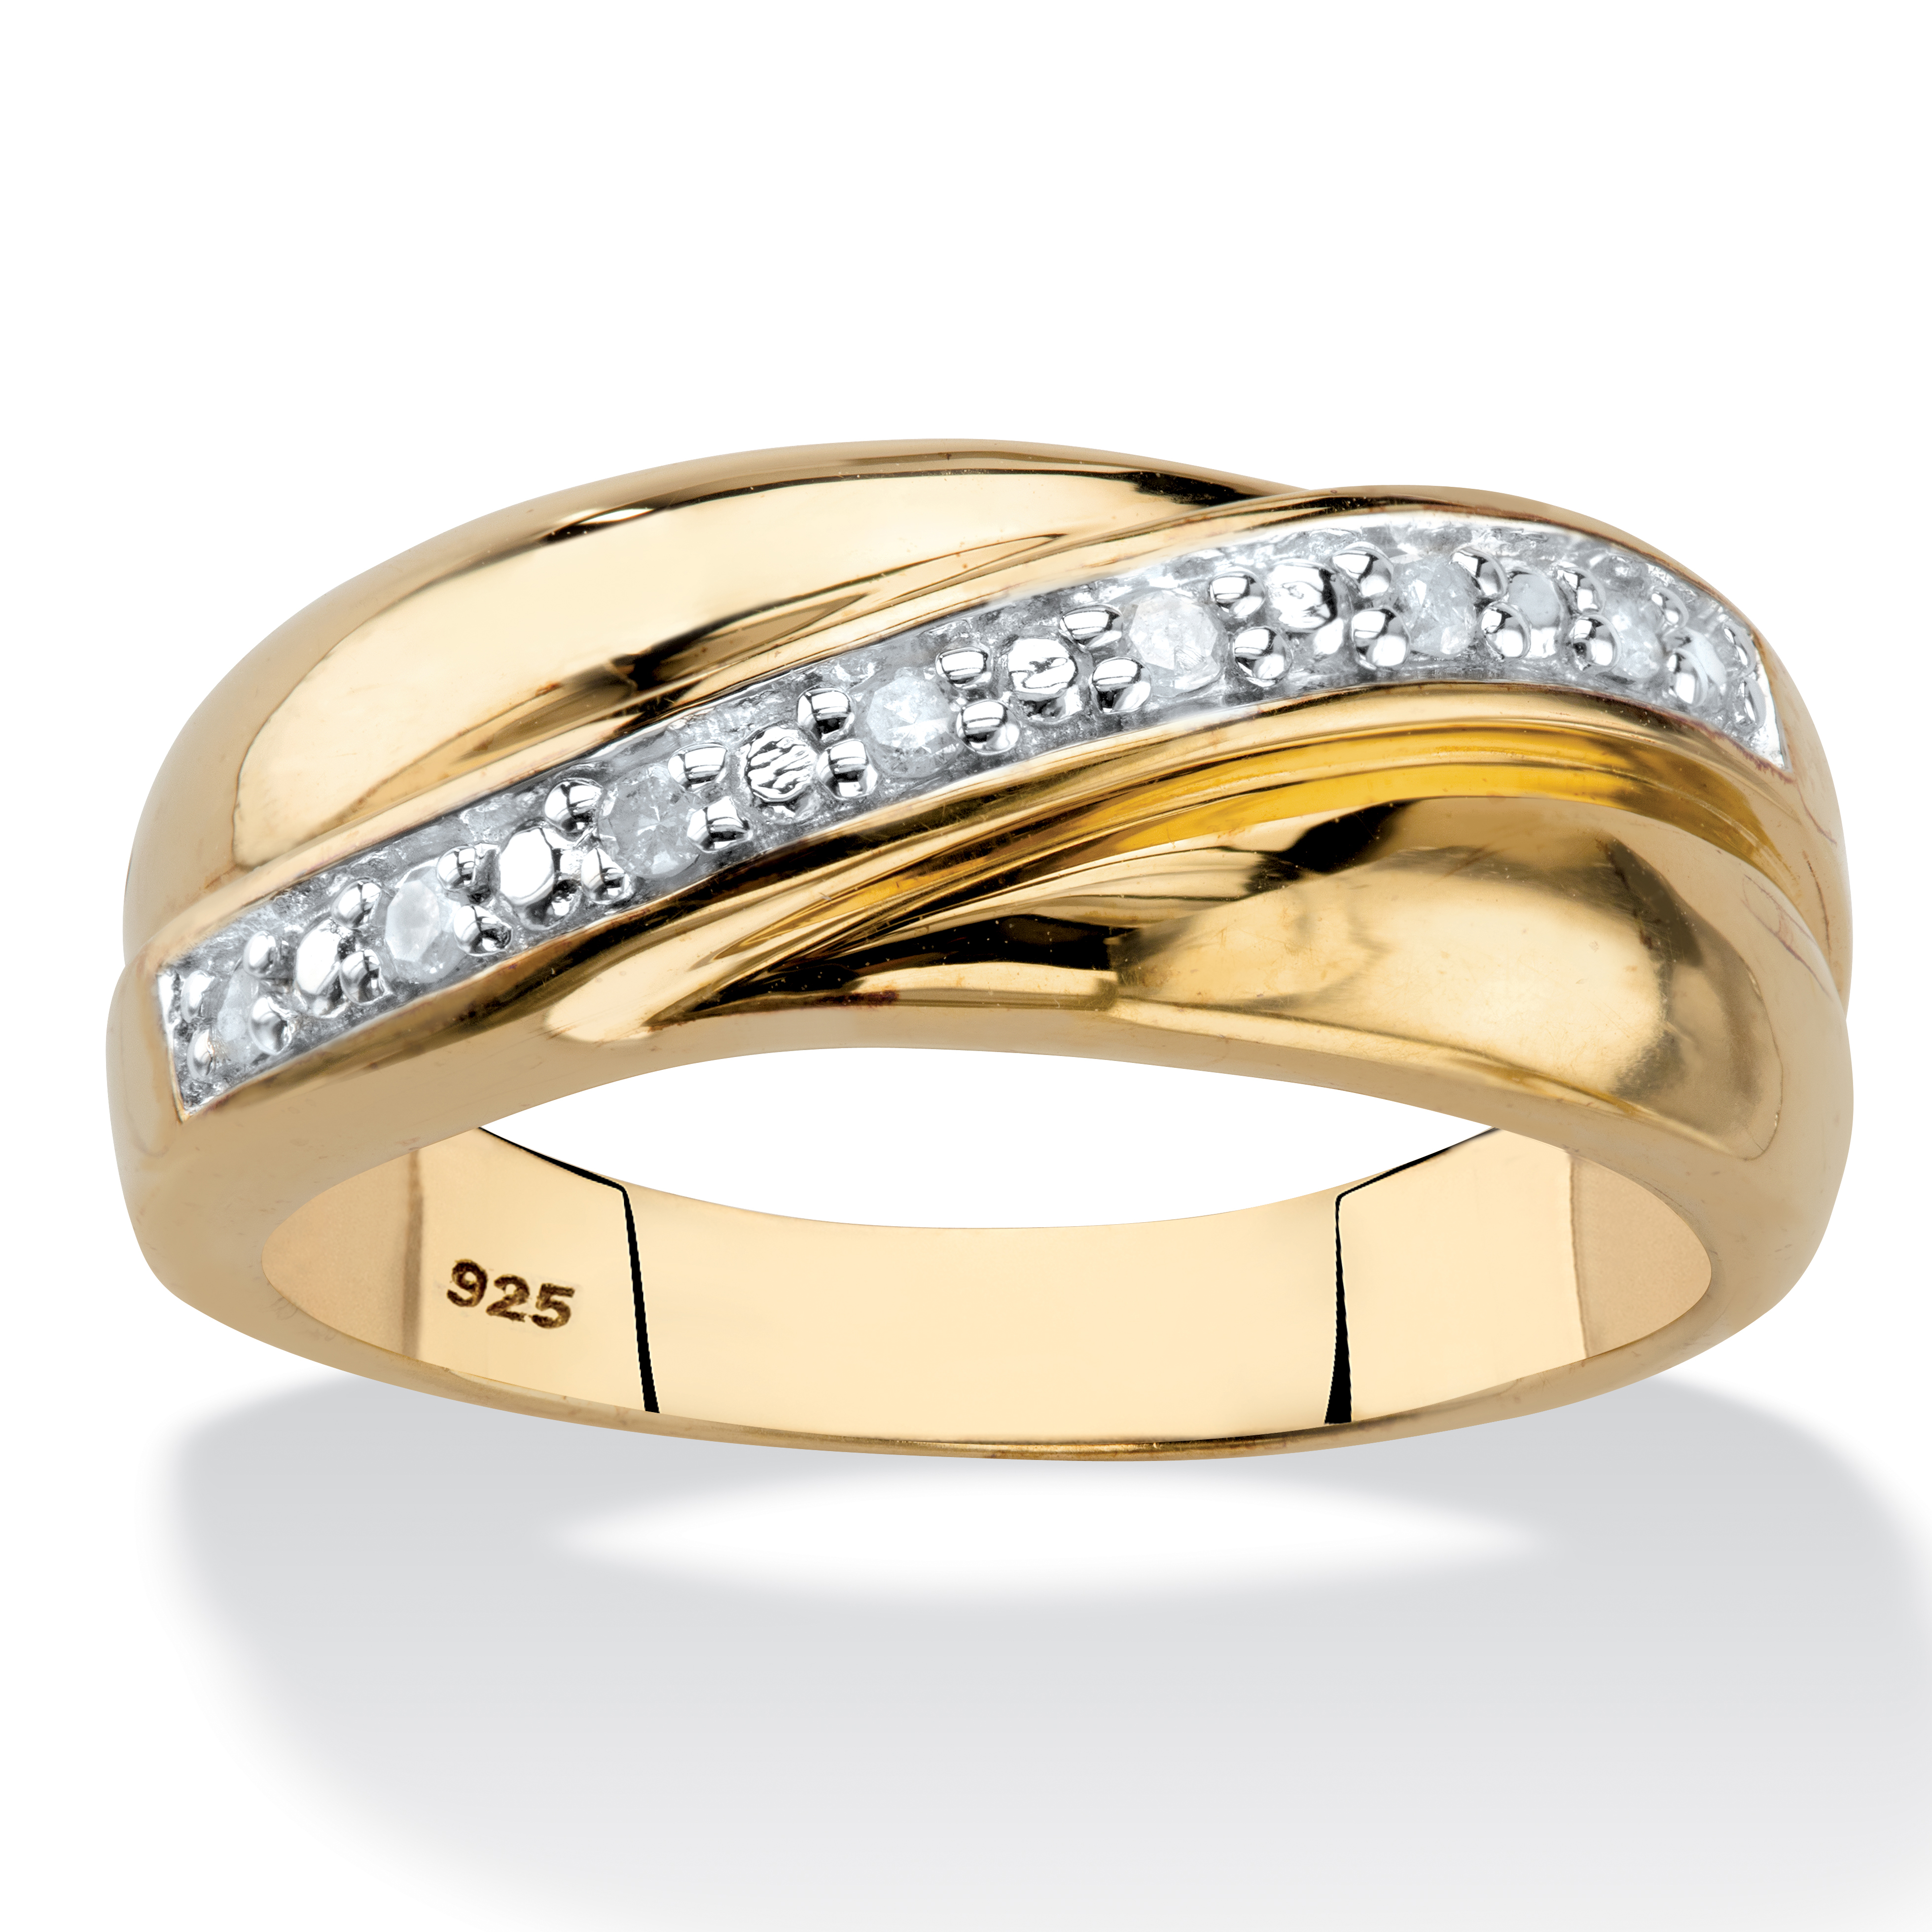 PalmBeach Jewelry Men's 1/10 TCW Round Diamond Wedding Band in 18k Gold-plated Sterling Silver